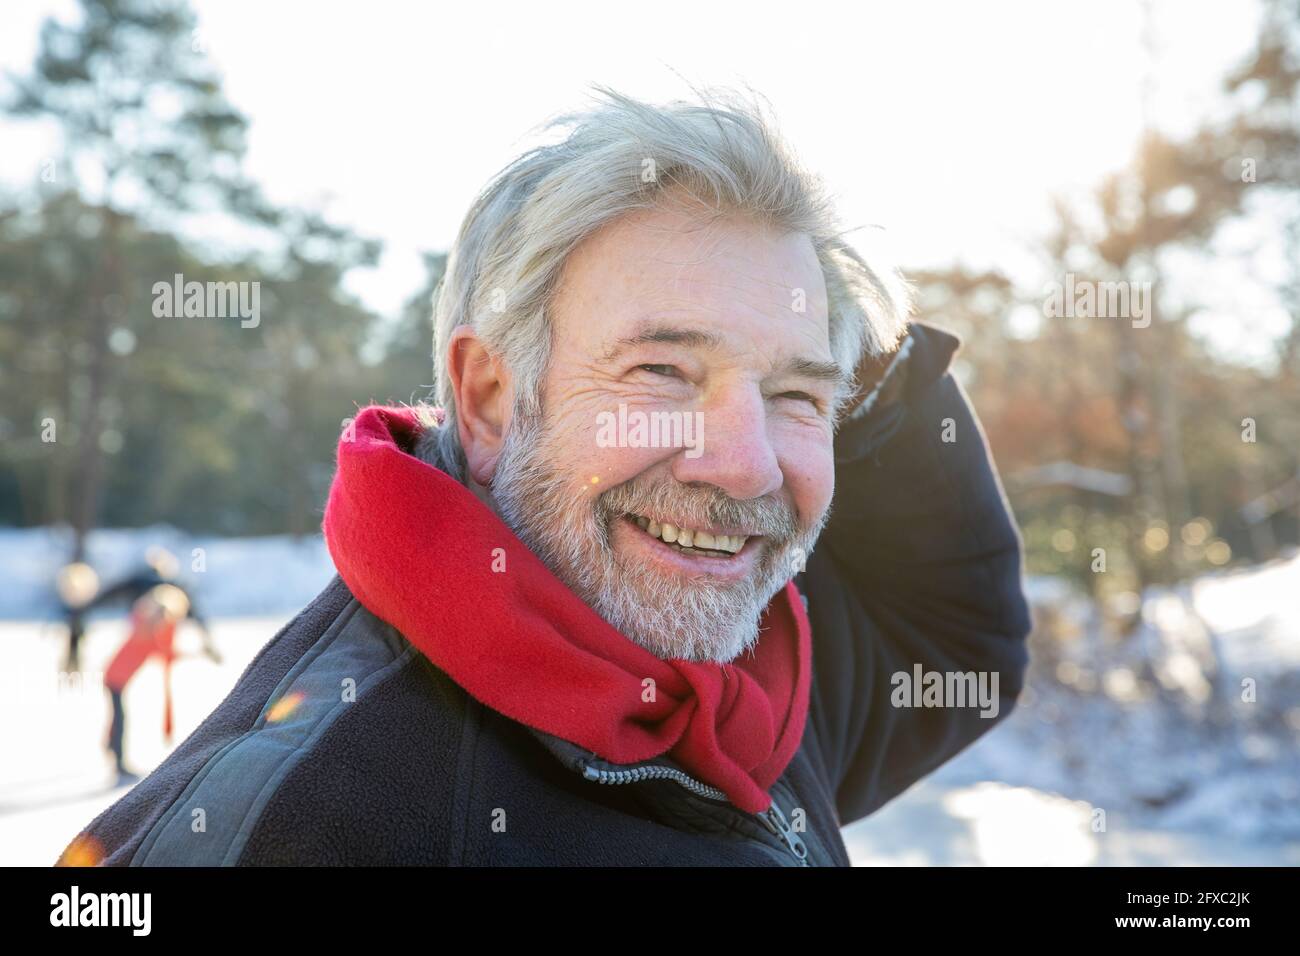 Happy senior man with red scarf during winter Stock Photo